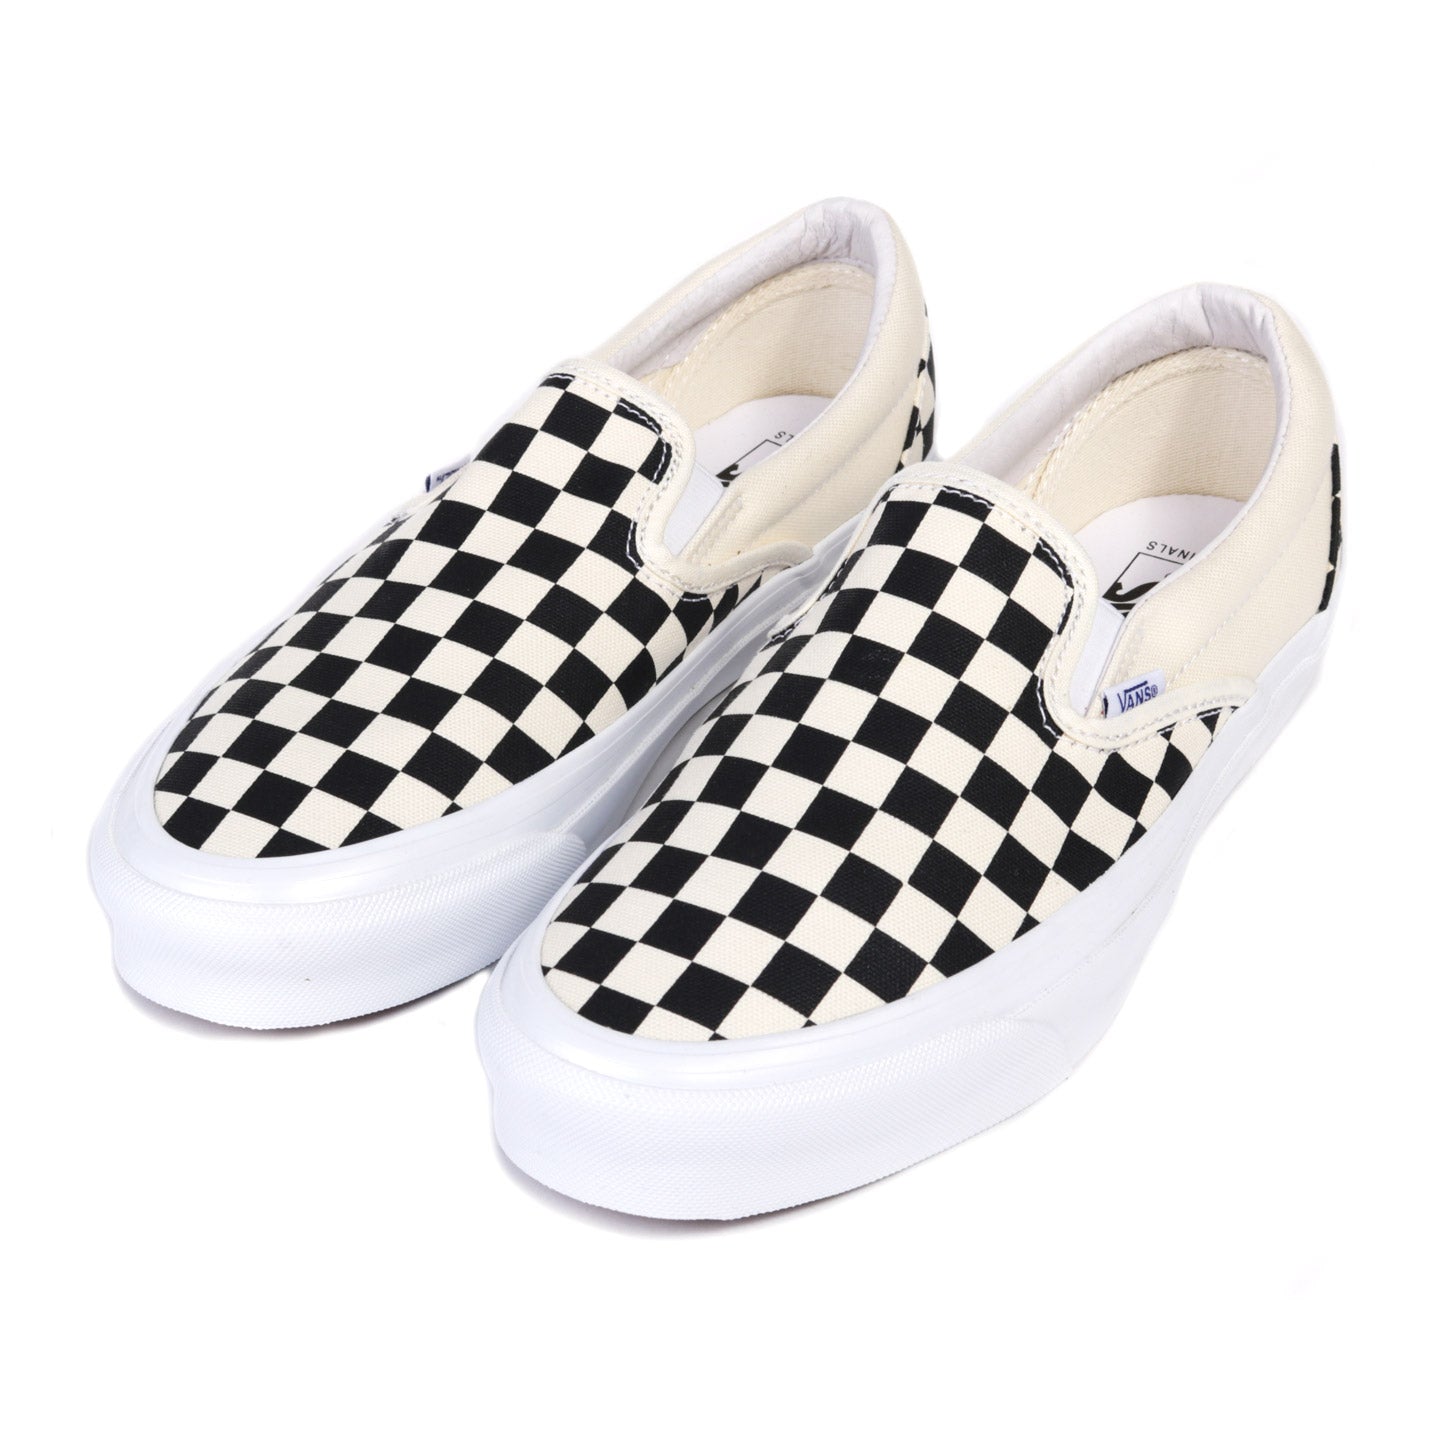 VAULT BY VANS CLASSIC SLIP-ON CANVAS CHECKERBOARD | TODAY CLOTHING